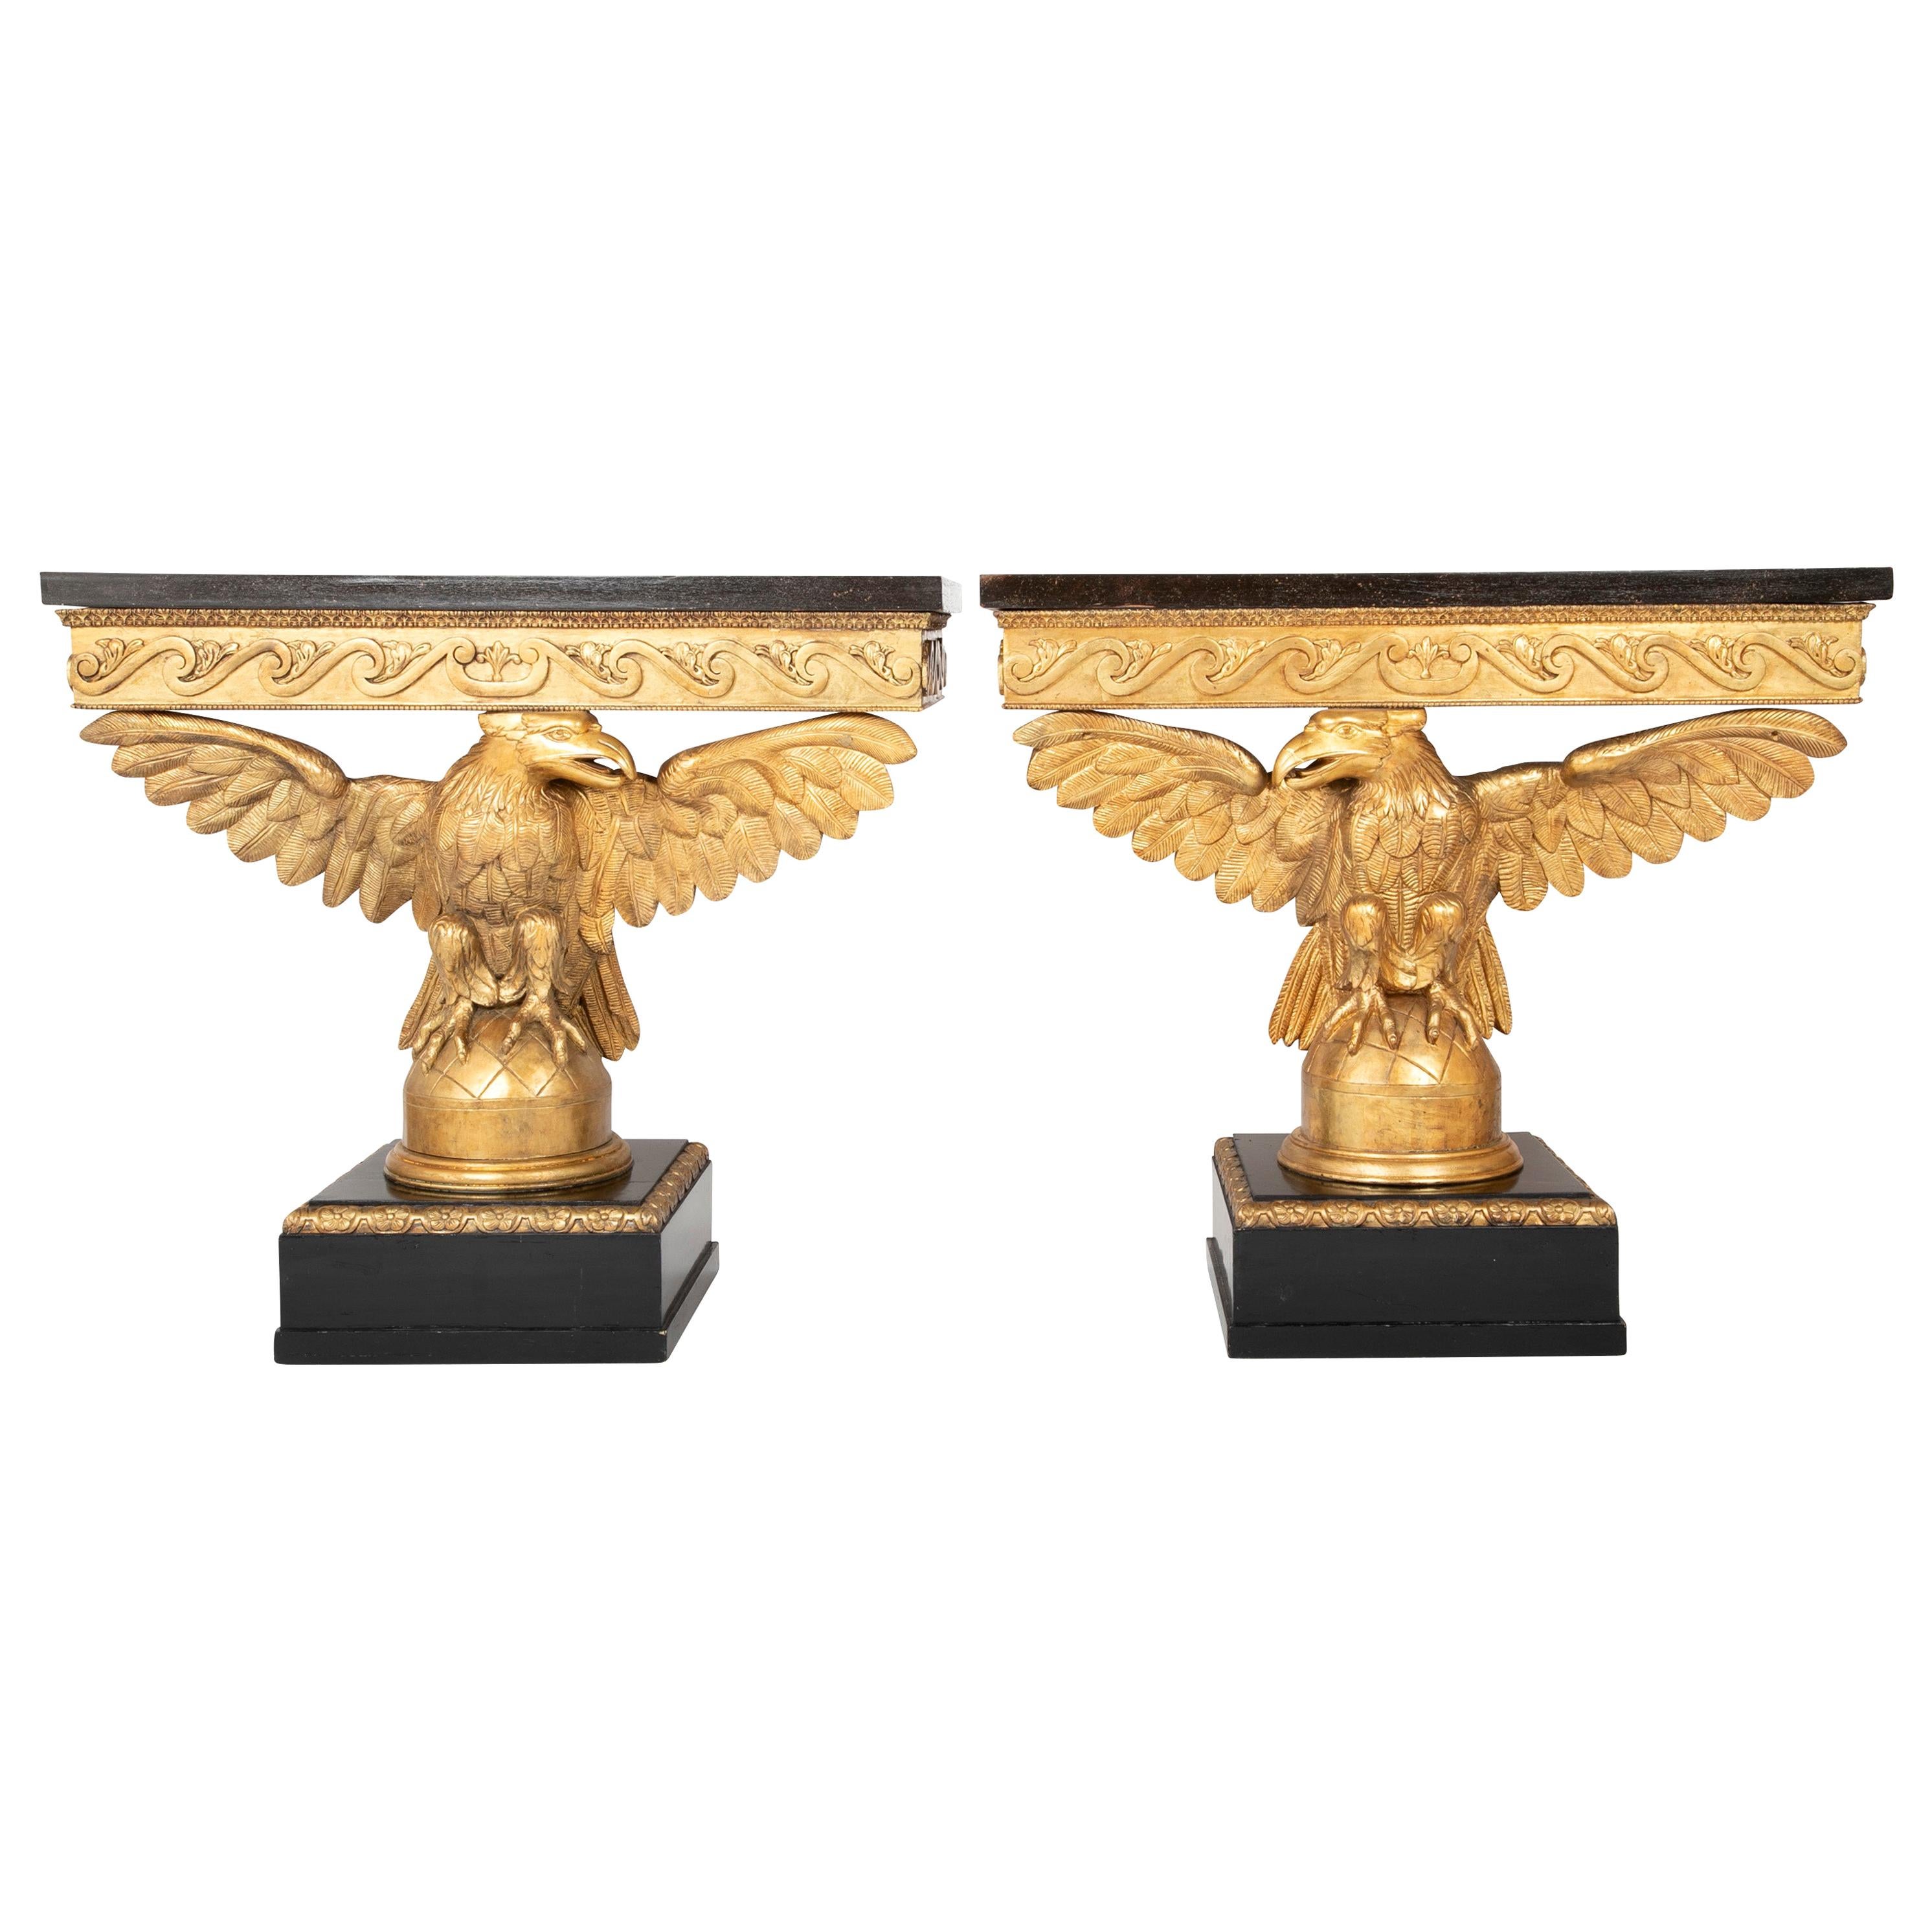 Pair of Early to Mid-19th Century Giltwood Eagle Console Tables